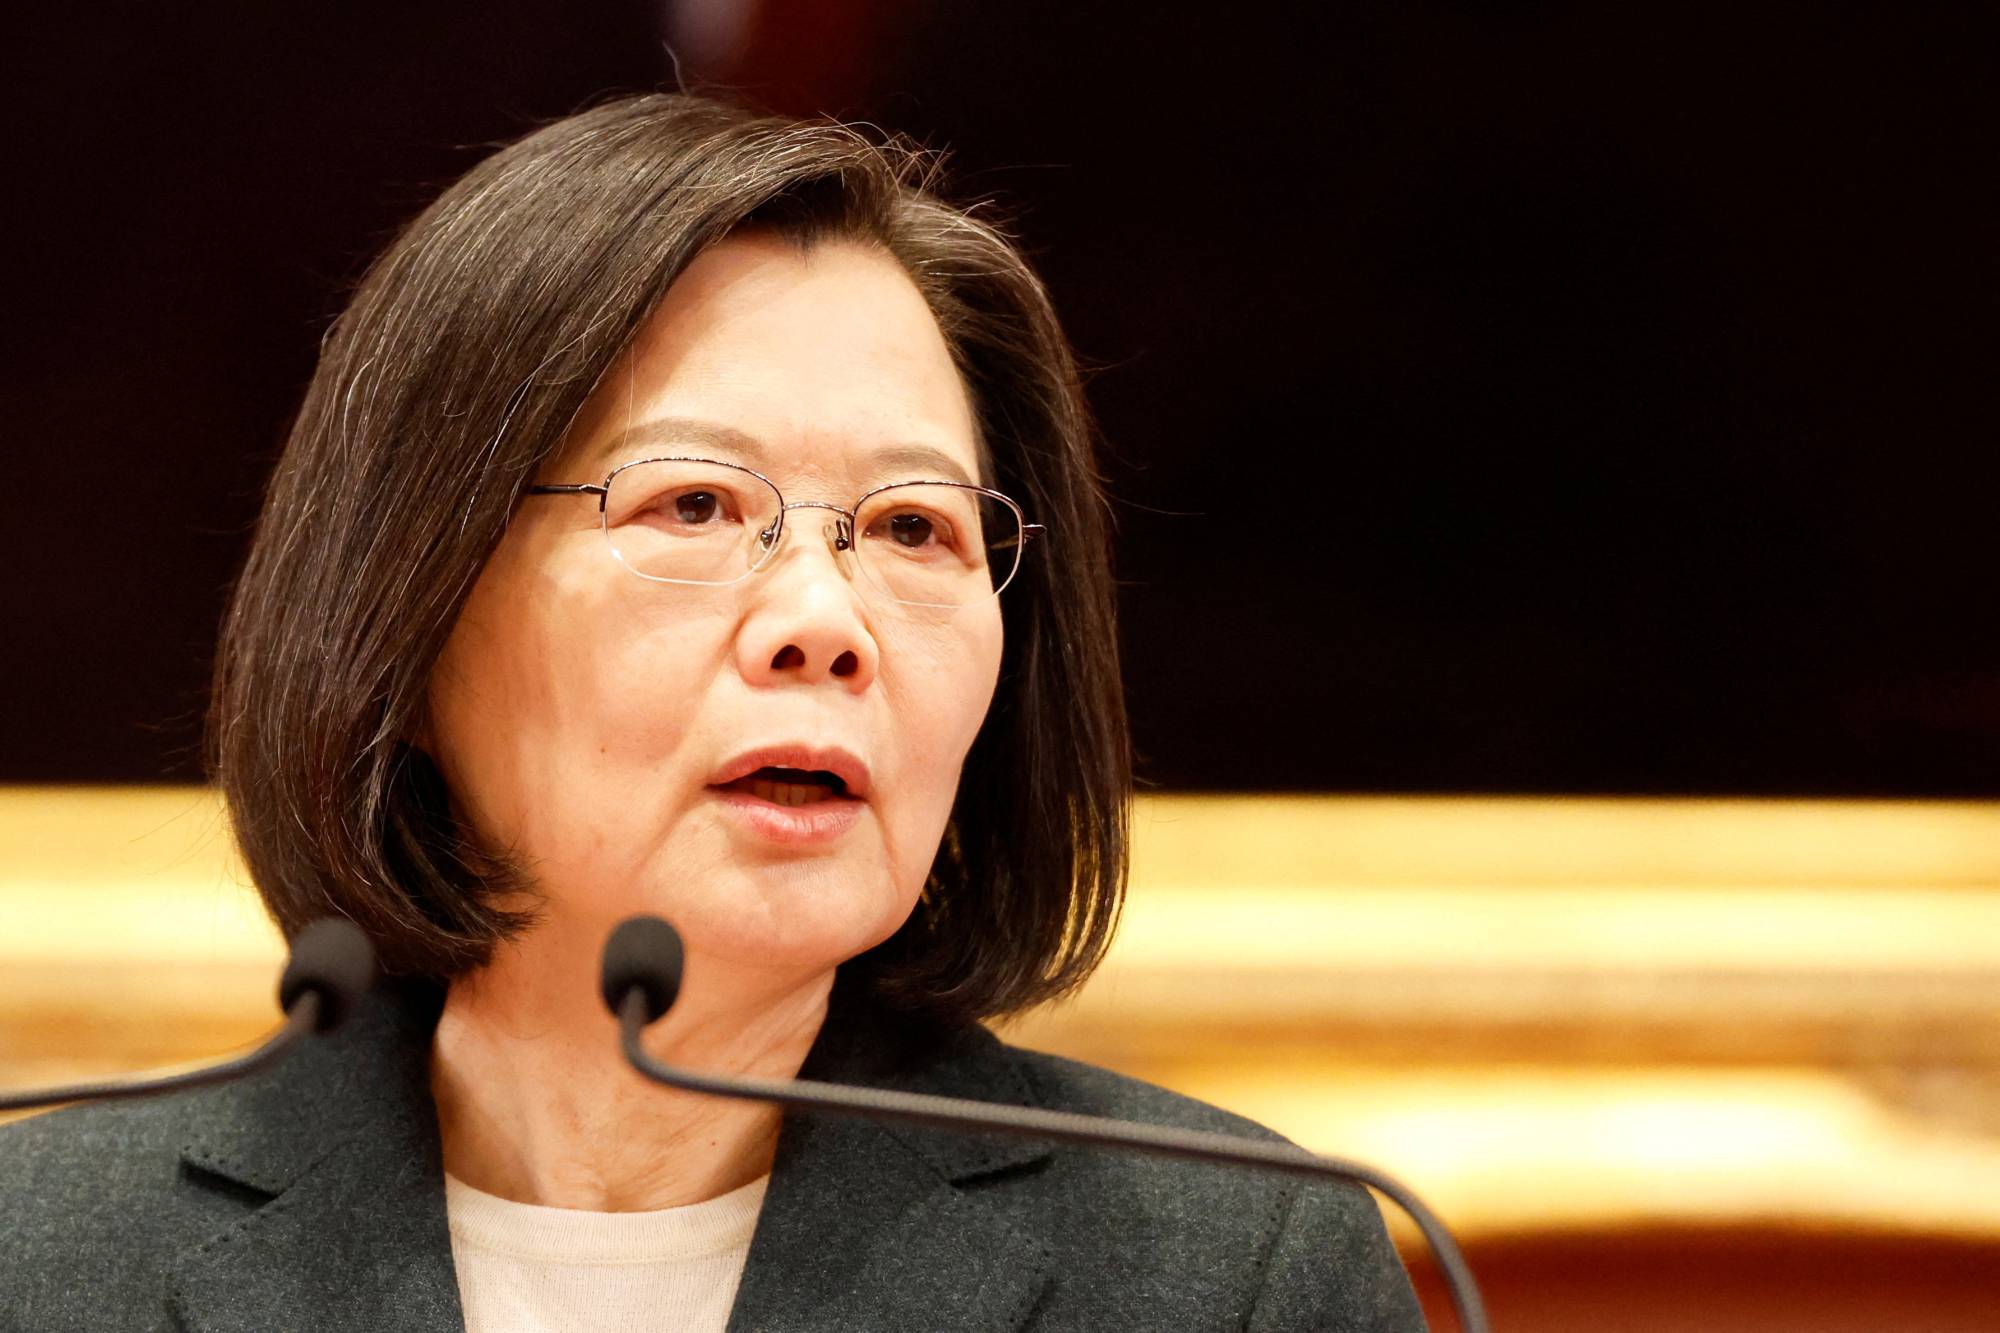 Taiwan President Tsai Ing-wen speaks during a news conference with the incoming Taiwan Premier Chen Chien-jen and outgoing Taiwan Premier Su Tseng-chang at the presidential office in Taipei on January 27. | REUTERS